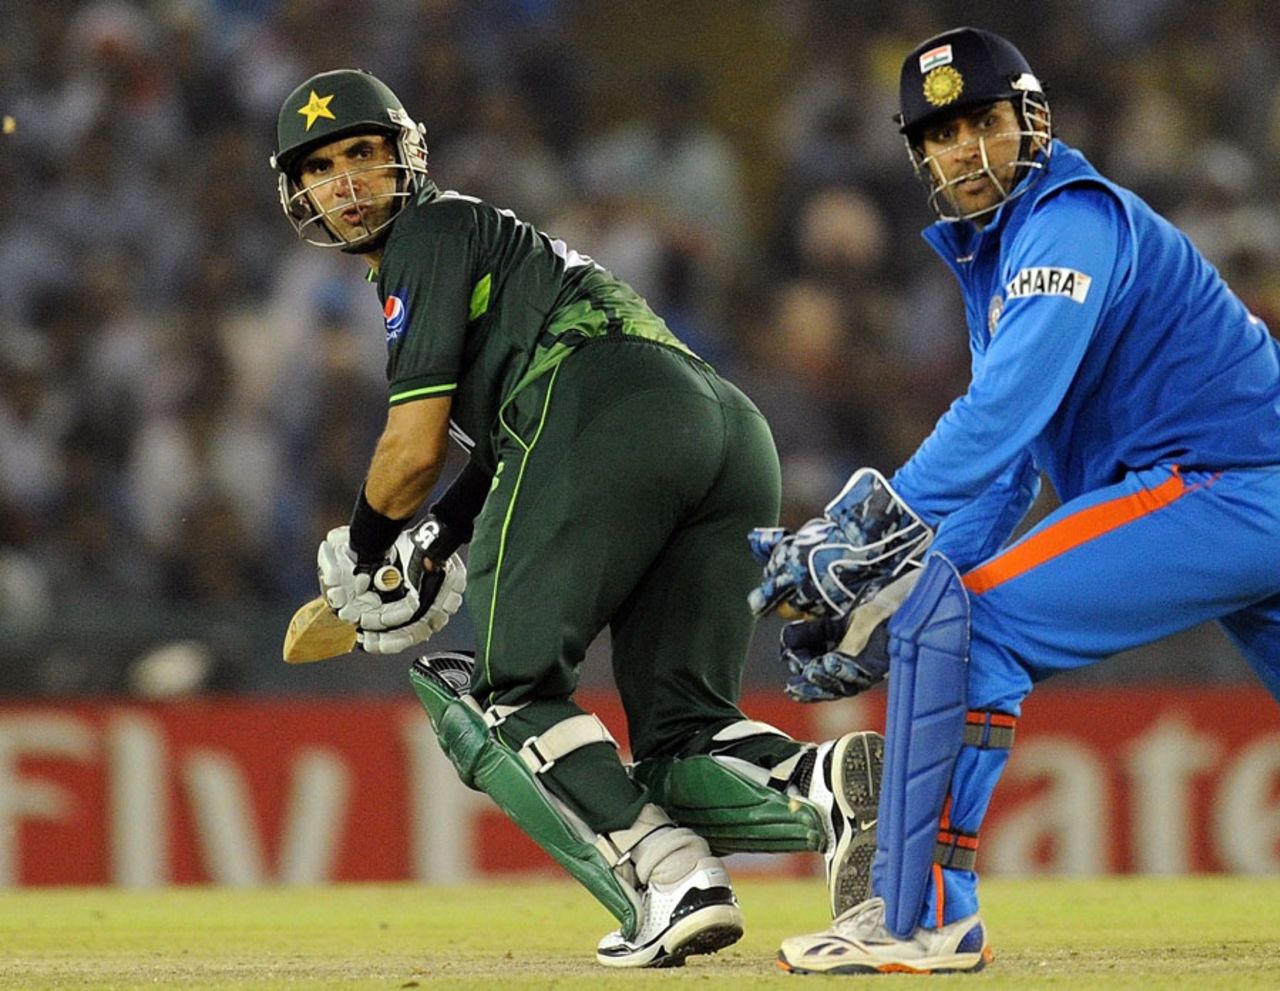 Misbah-ul-Haq scored a typically doughty half-century but it wasn't enough for Pakistan, India v Pakistan, 2nd semi-final, World Cup 2011, Mohali, March 30, 2011